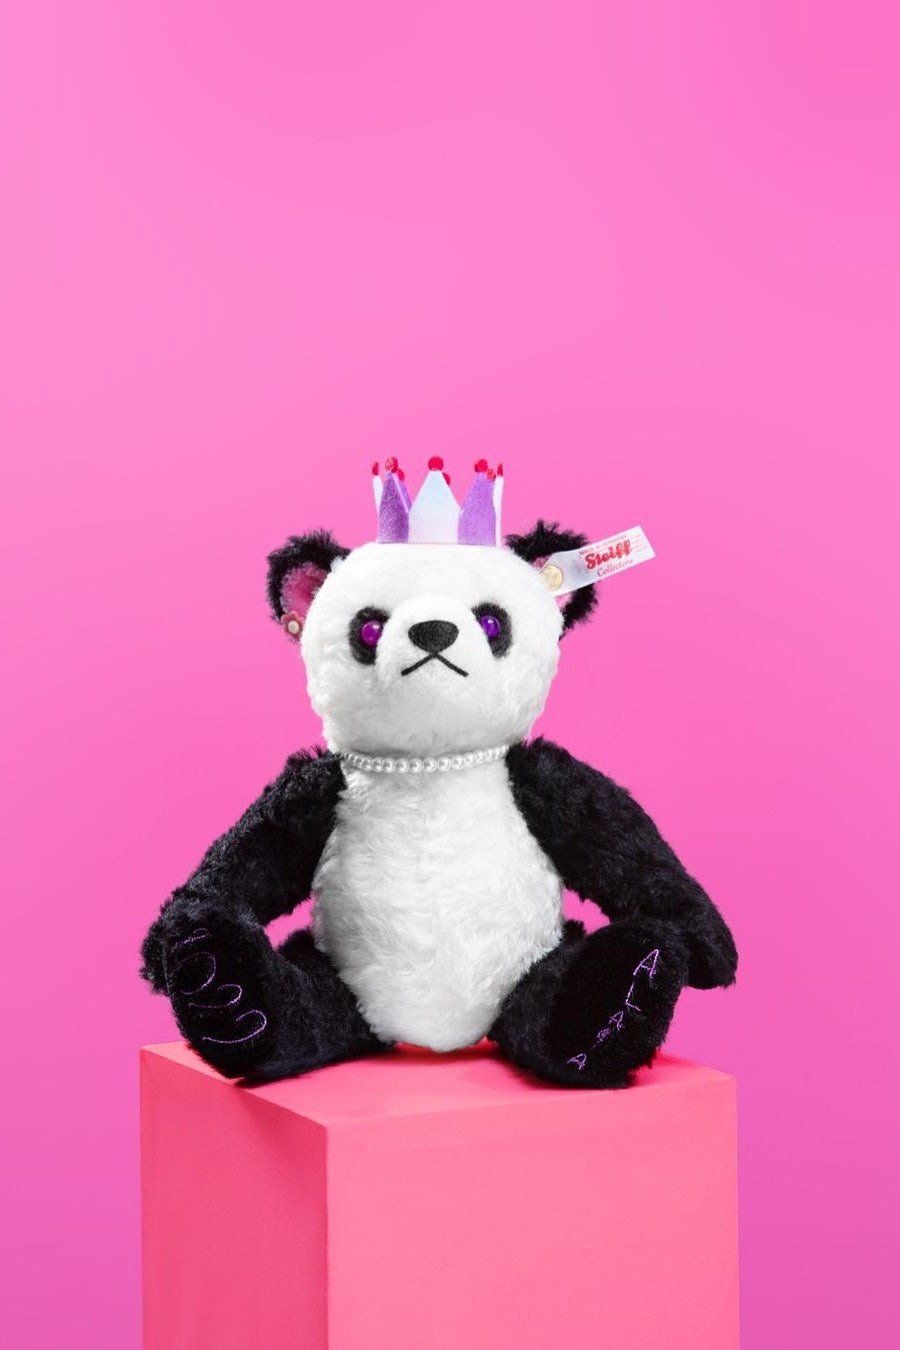 'Panda Berry Cute' was designed by Alaia Chen, the daughter of Clot founder Edison Chen. Photo: Steiff